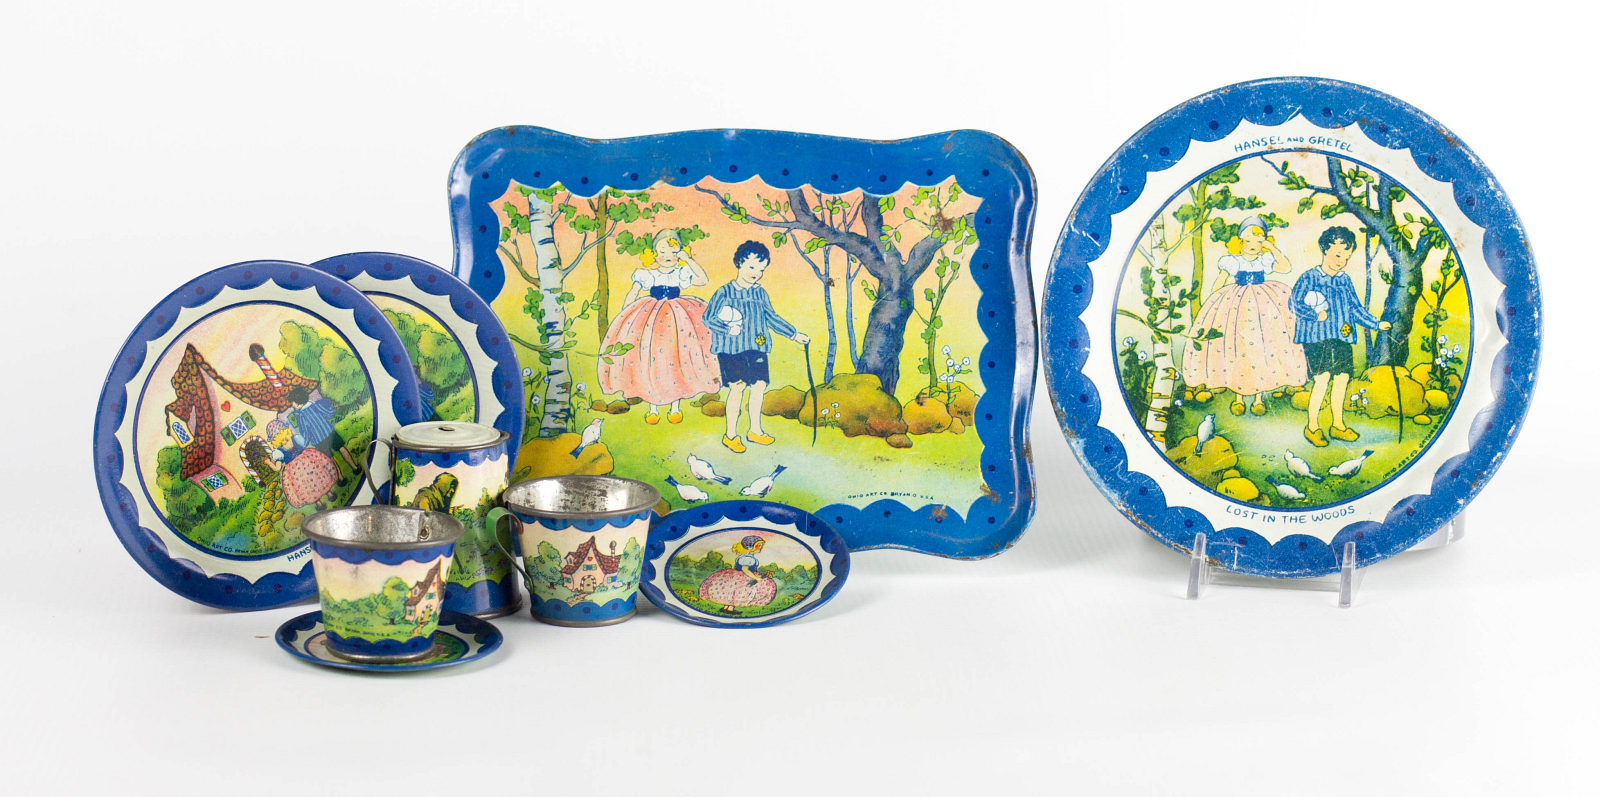 A TIN LITHO CHILD'S TEA SET WITH HANSEL AND GRETEL